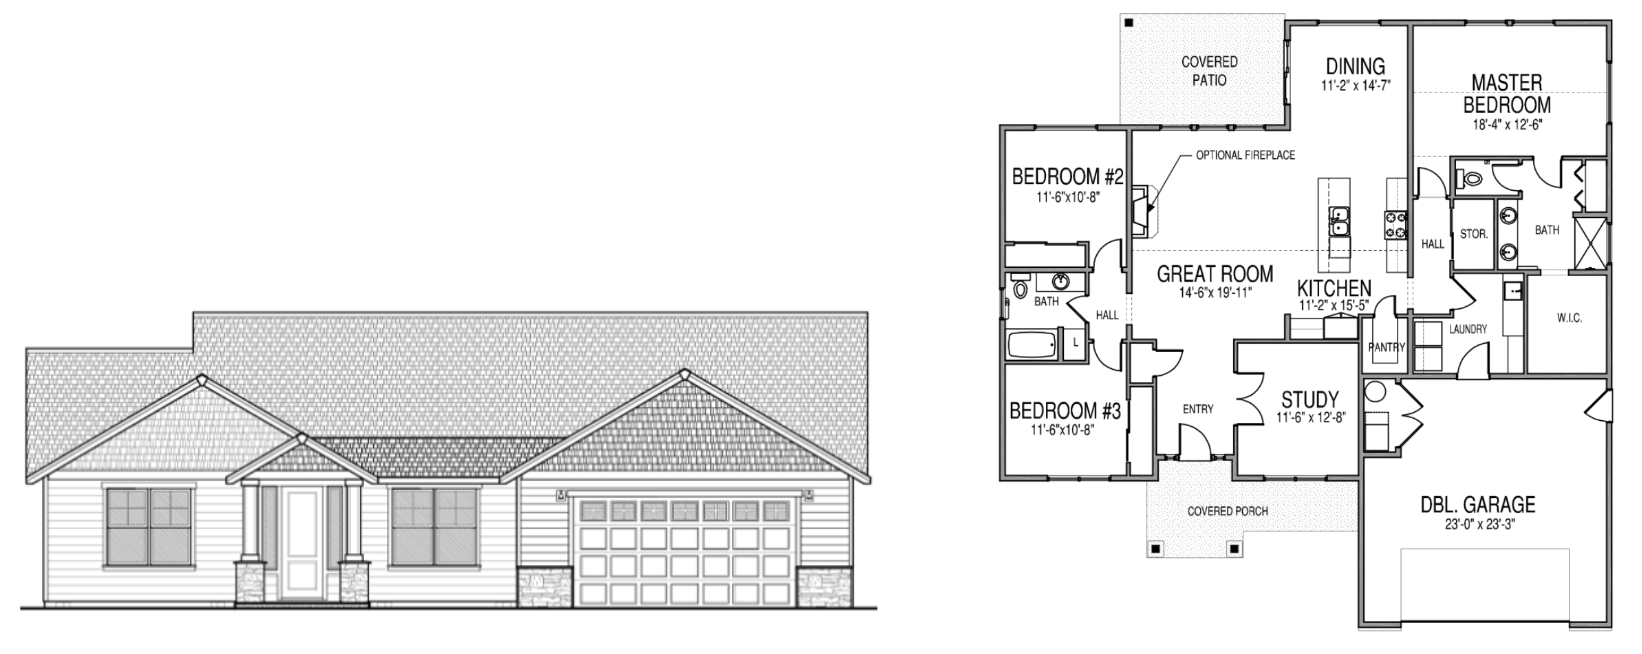 Lincoln 2 single story home floor plan with a master bedroom with a walk in closet and bathroom, storage closet, 2 additional bedrooms, another bathroom, a great room, dining room, kitchen, pantry, laundry room, study, double garage, and a covered porch and patio